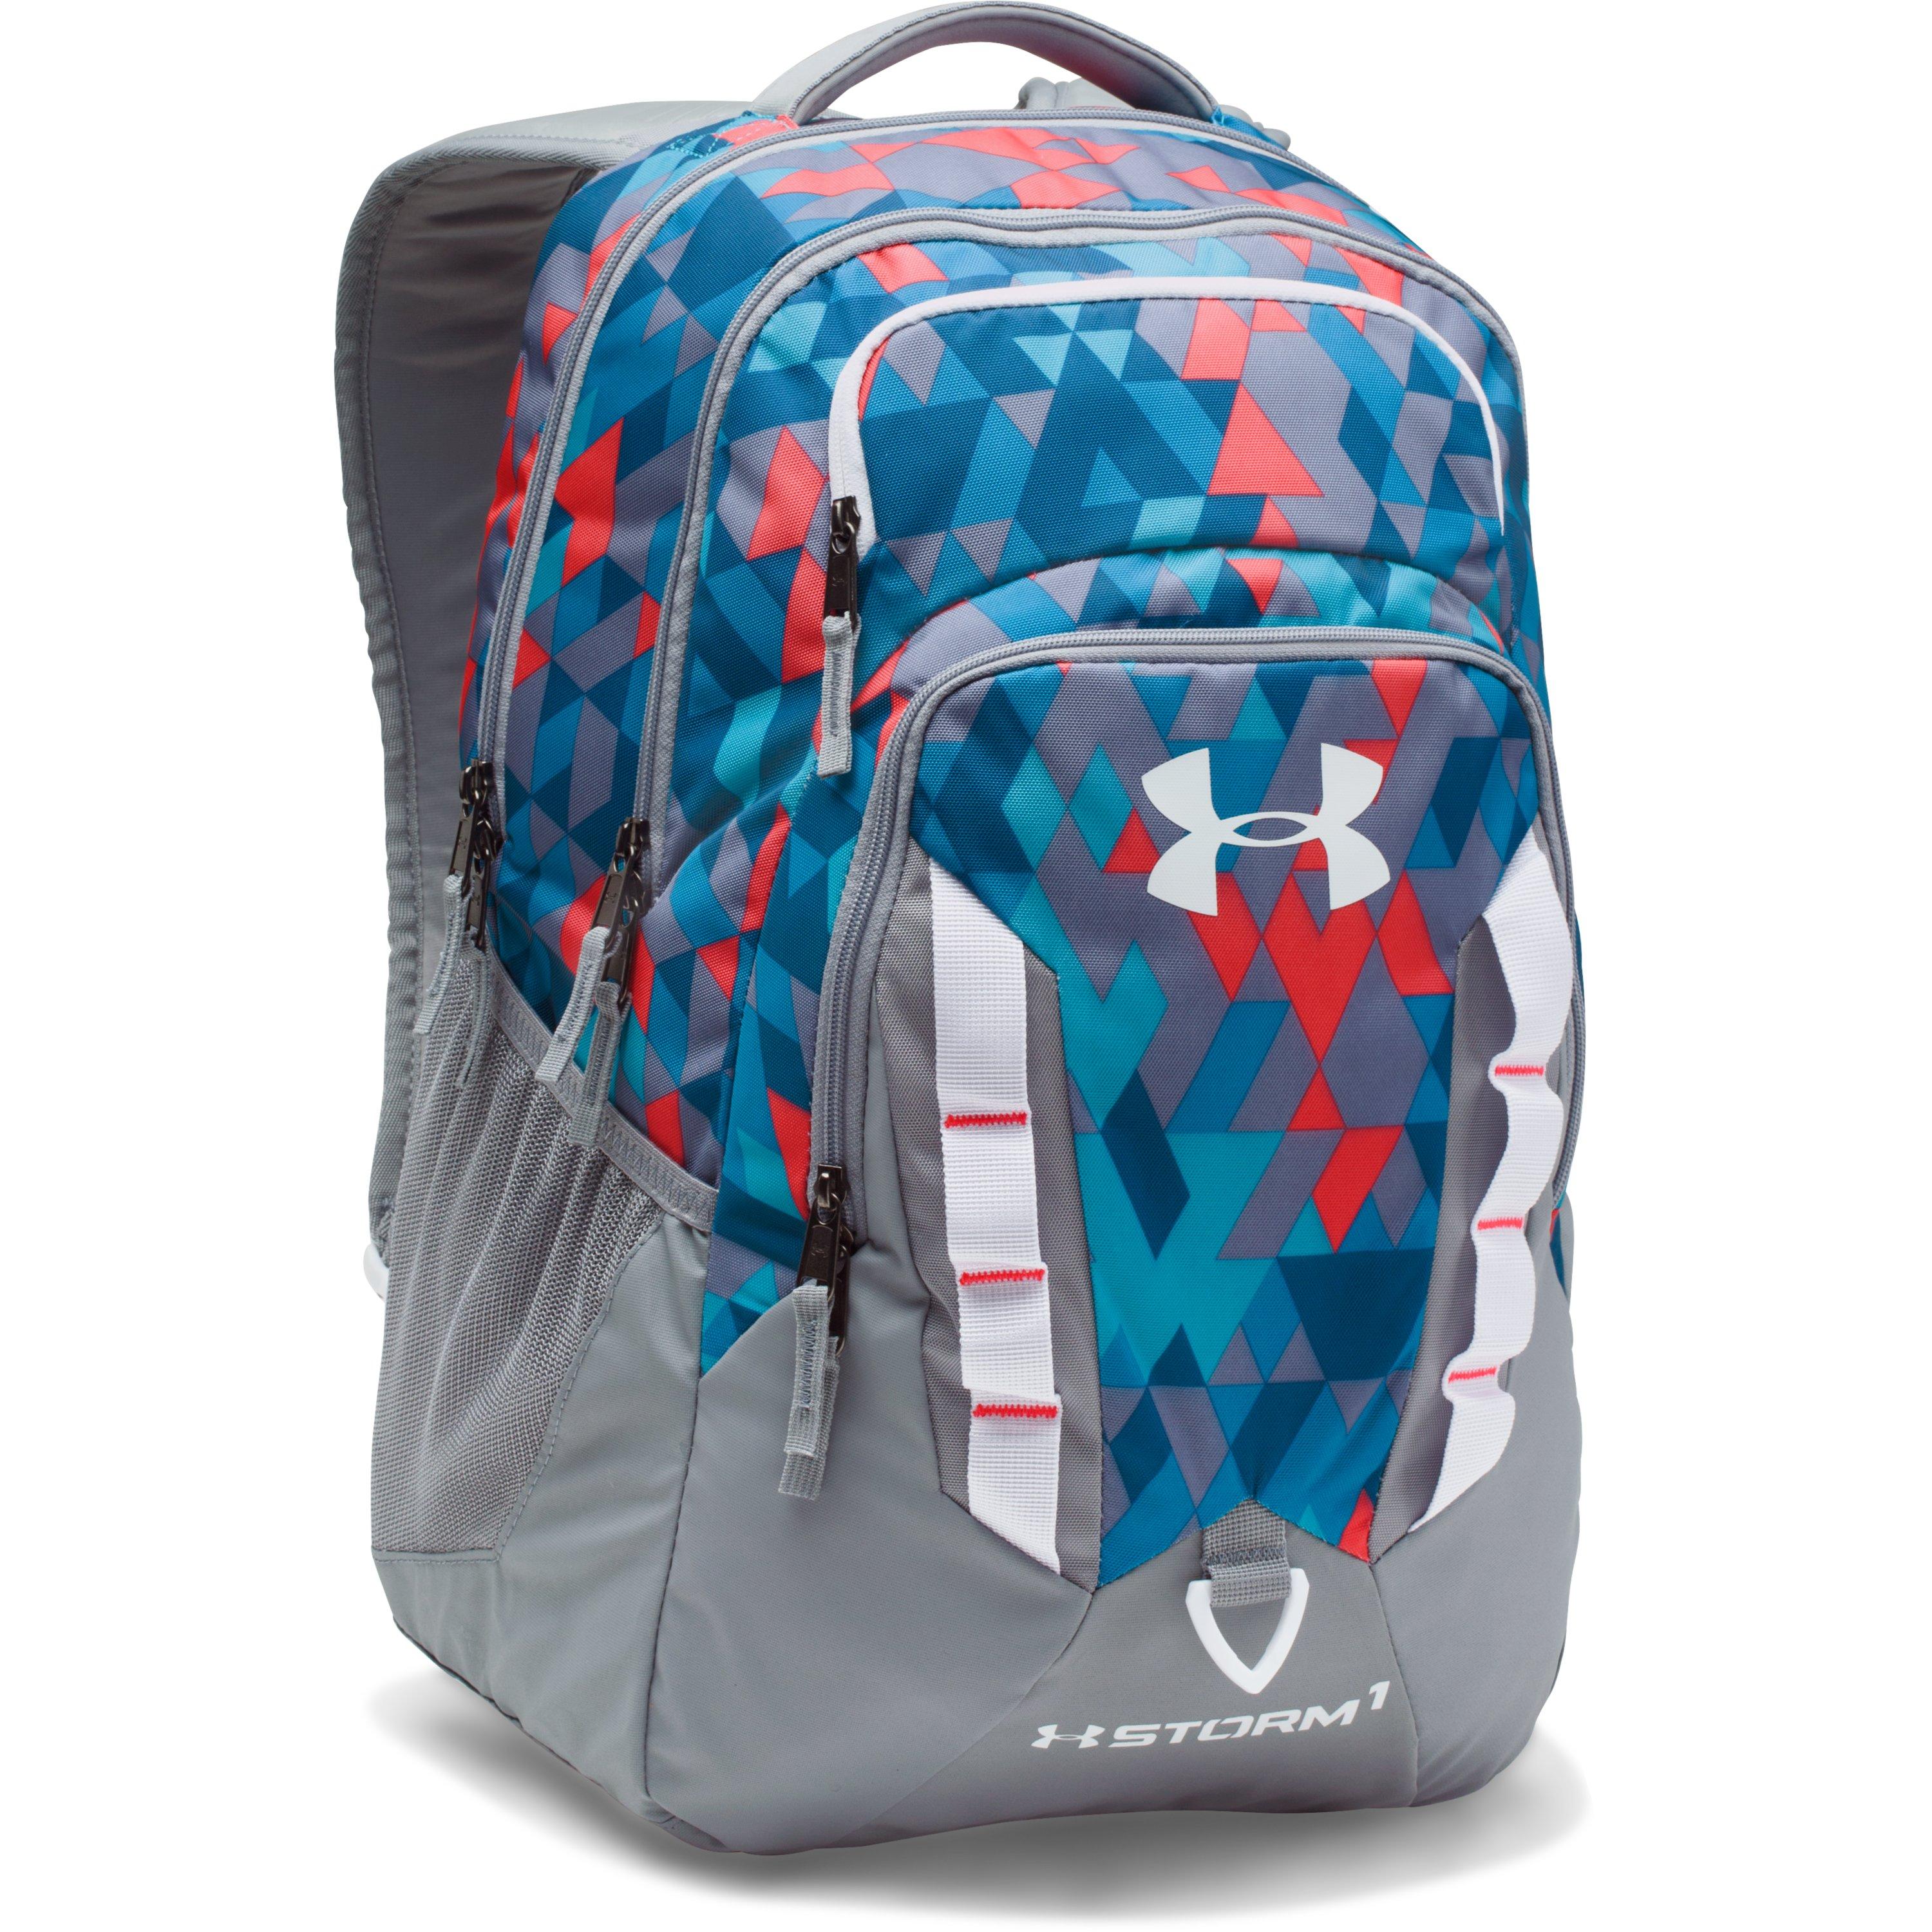 under armour storm recruit backpack blue